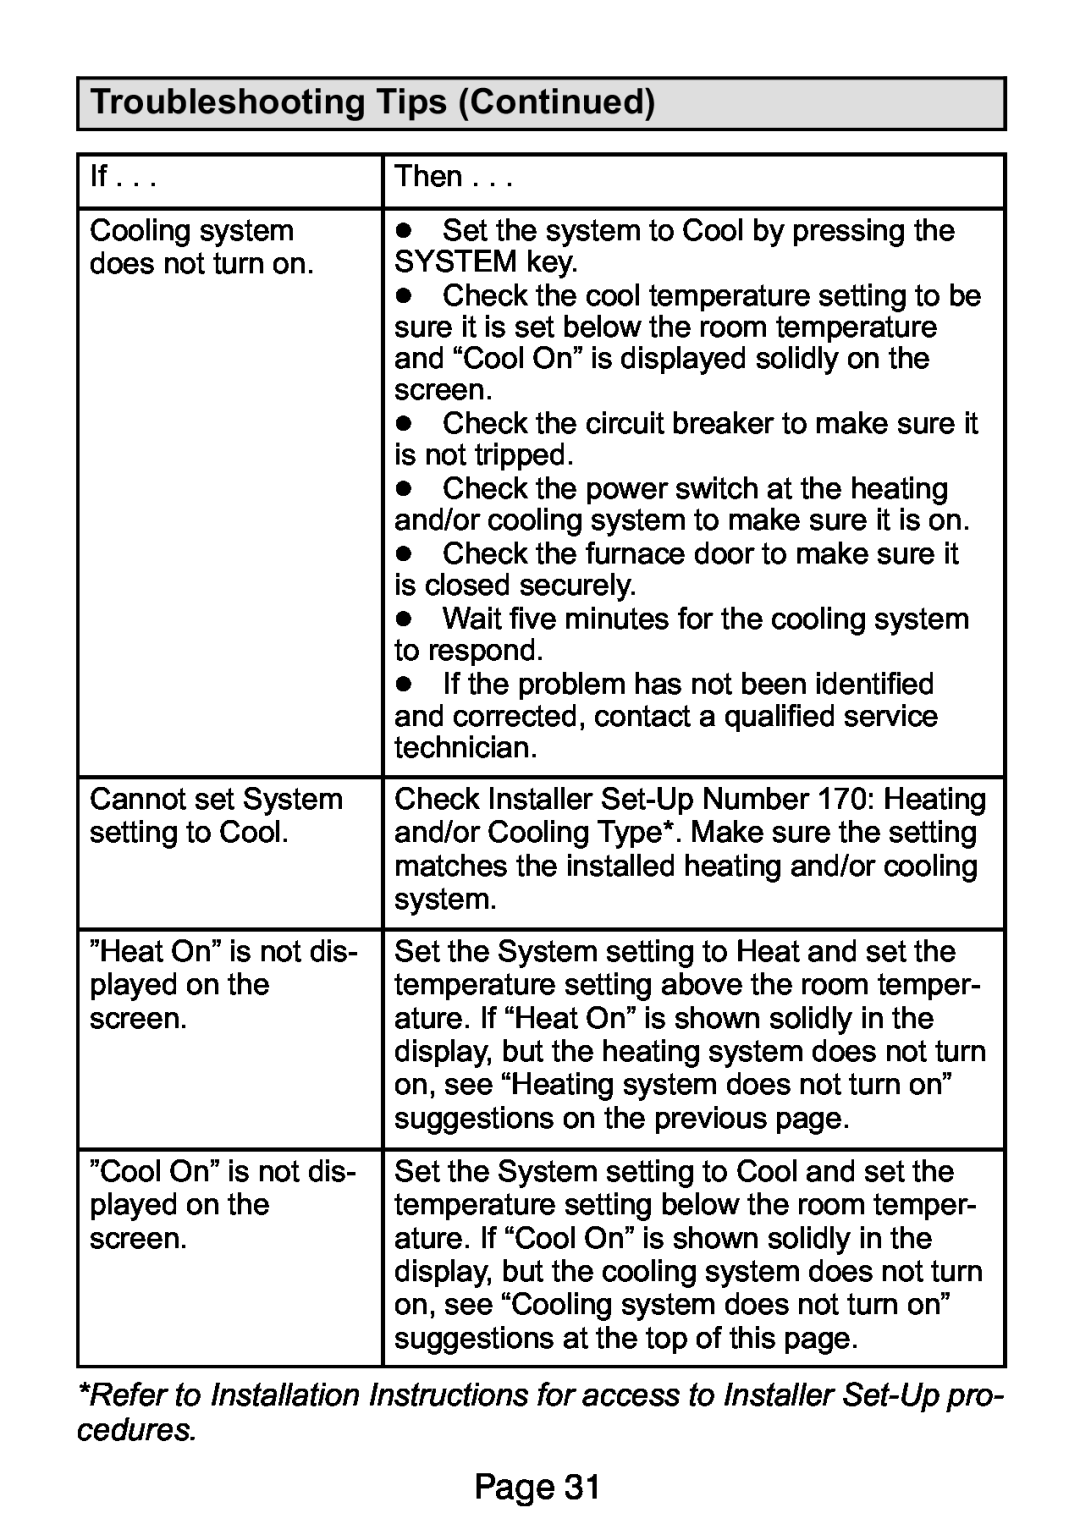 Lennox International Inc Ellite Series manual Troubleshooting Tips Continued, Page 